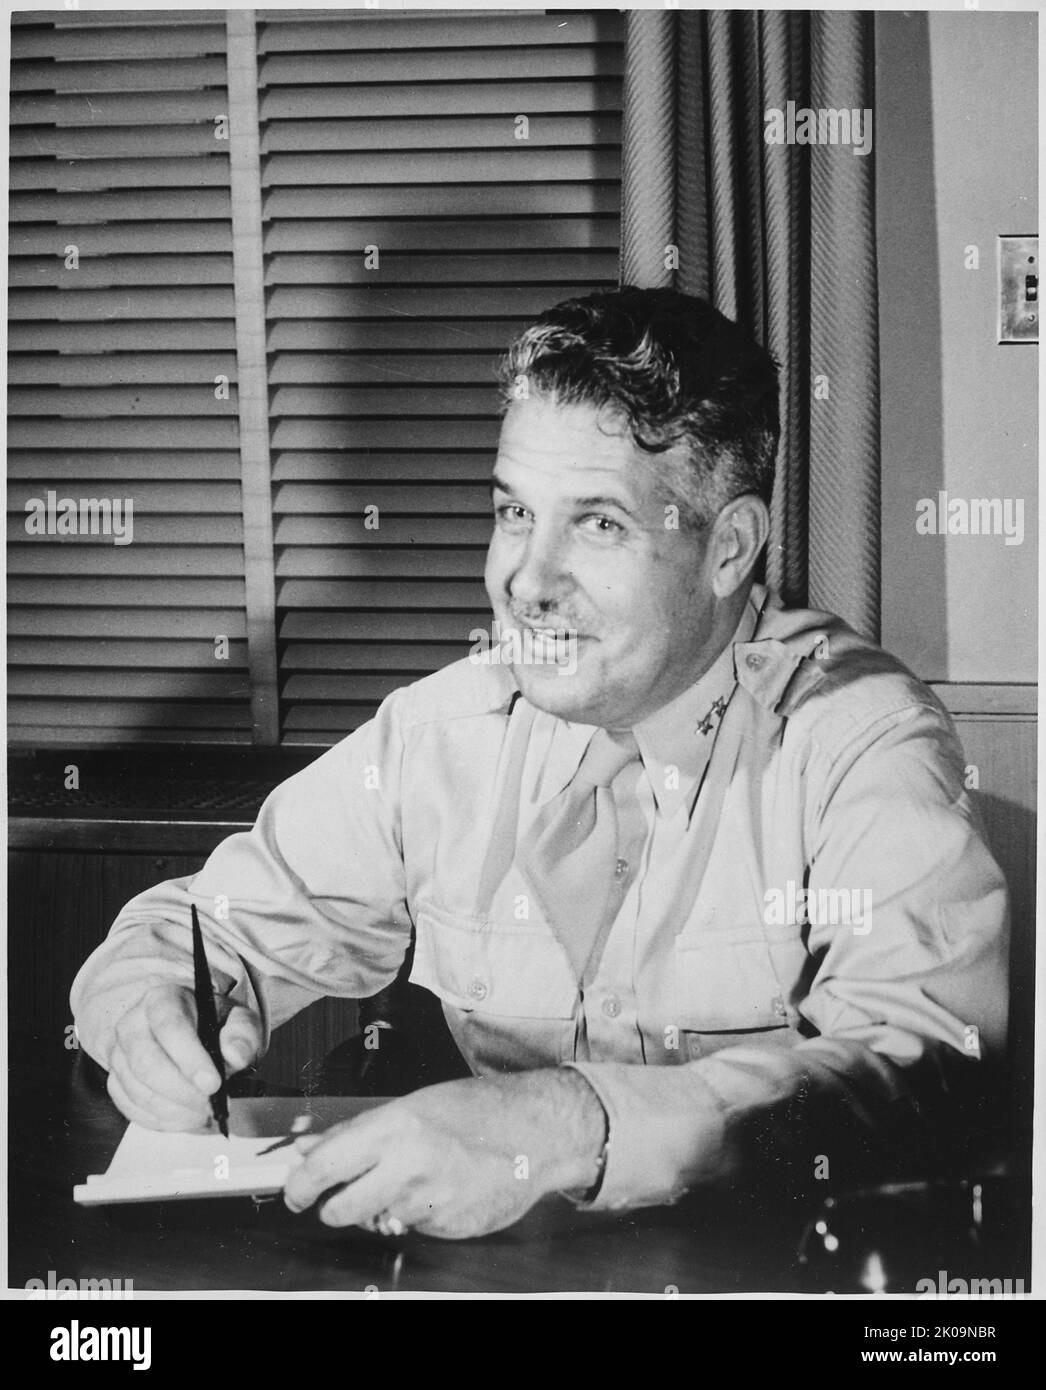 Lieutenant General Leslie Richard Groves Jr. (17 August 1896 - 13 July 1970) was a United States Army Corps of Engineers officer who oversaw the construction of the Pentagon and directed the Manhattan Project, a top secret research project that developed the atomic bomb during World War II. Stock Photo